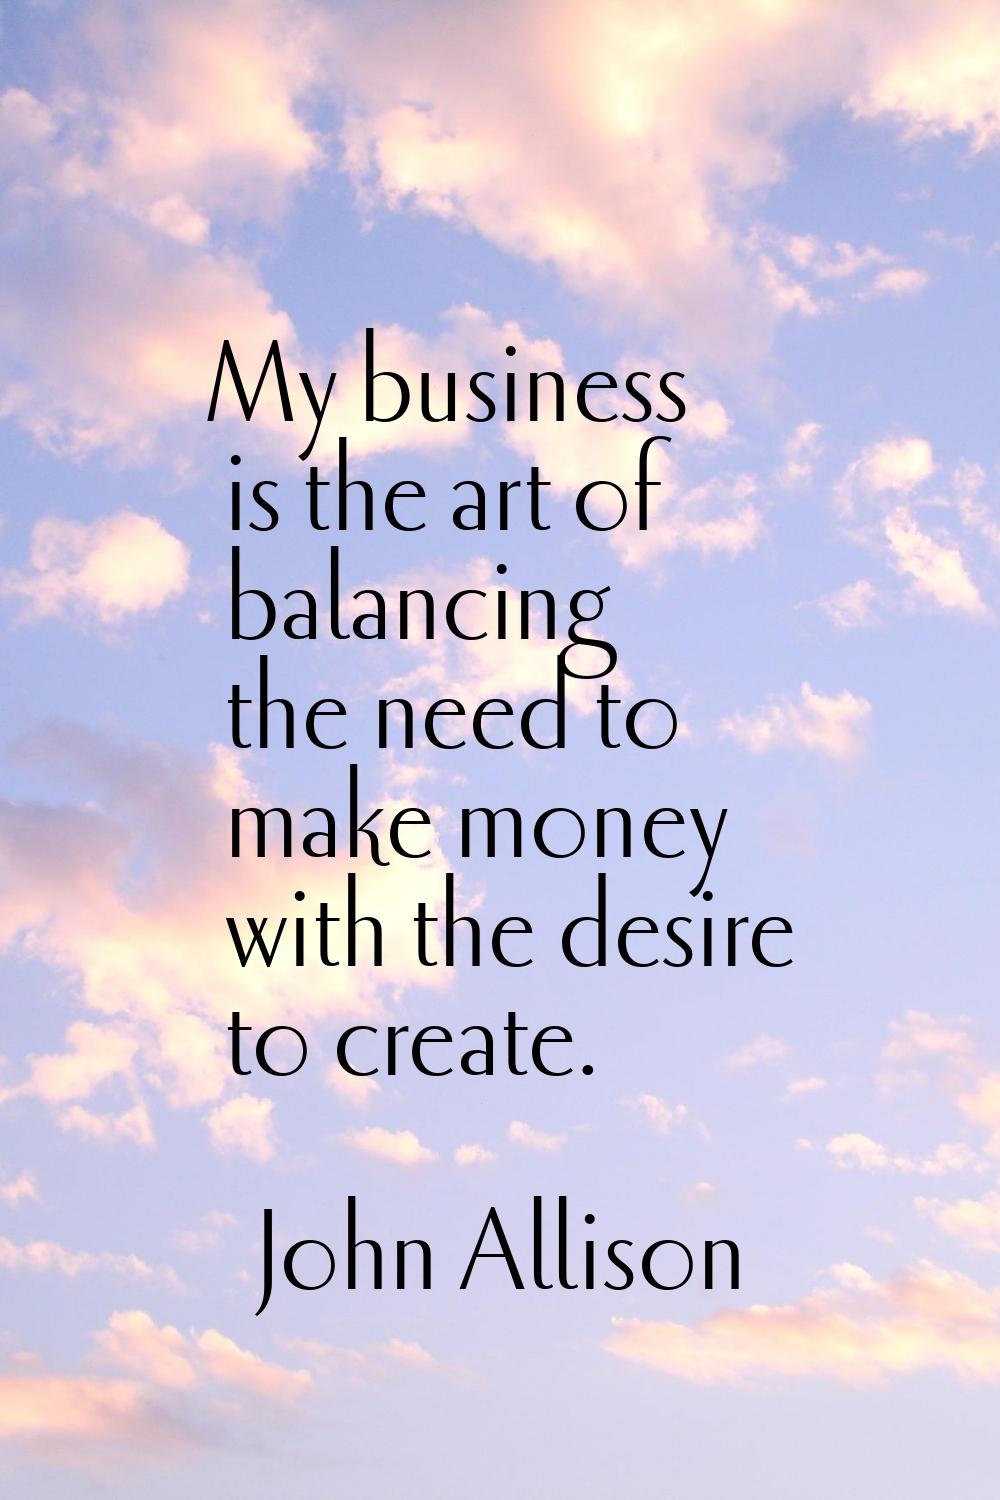 My business is the art of balancing the need to make money with the desire to create.